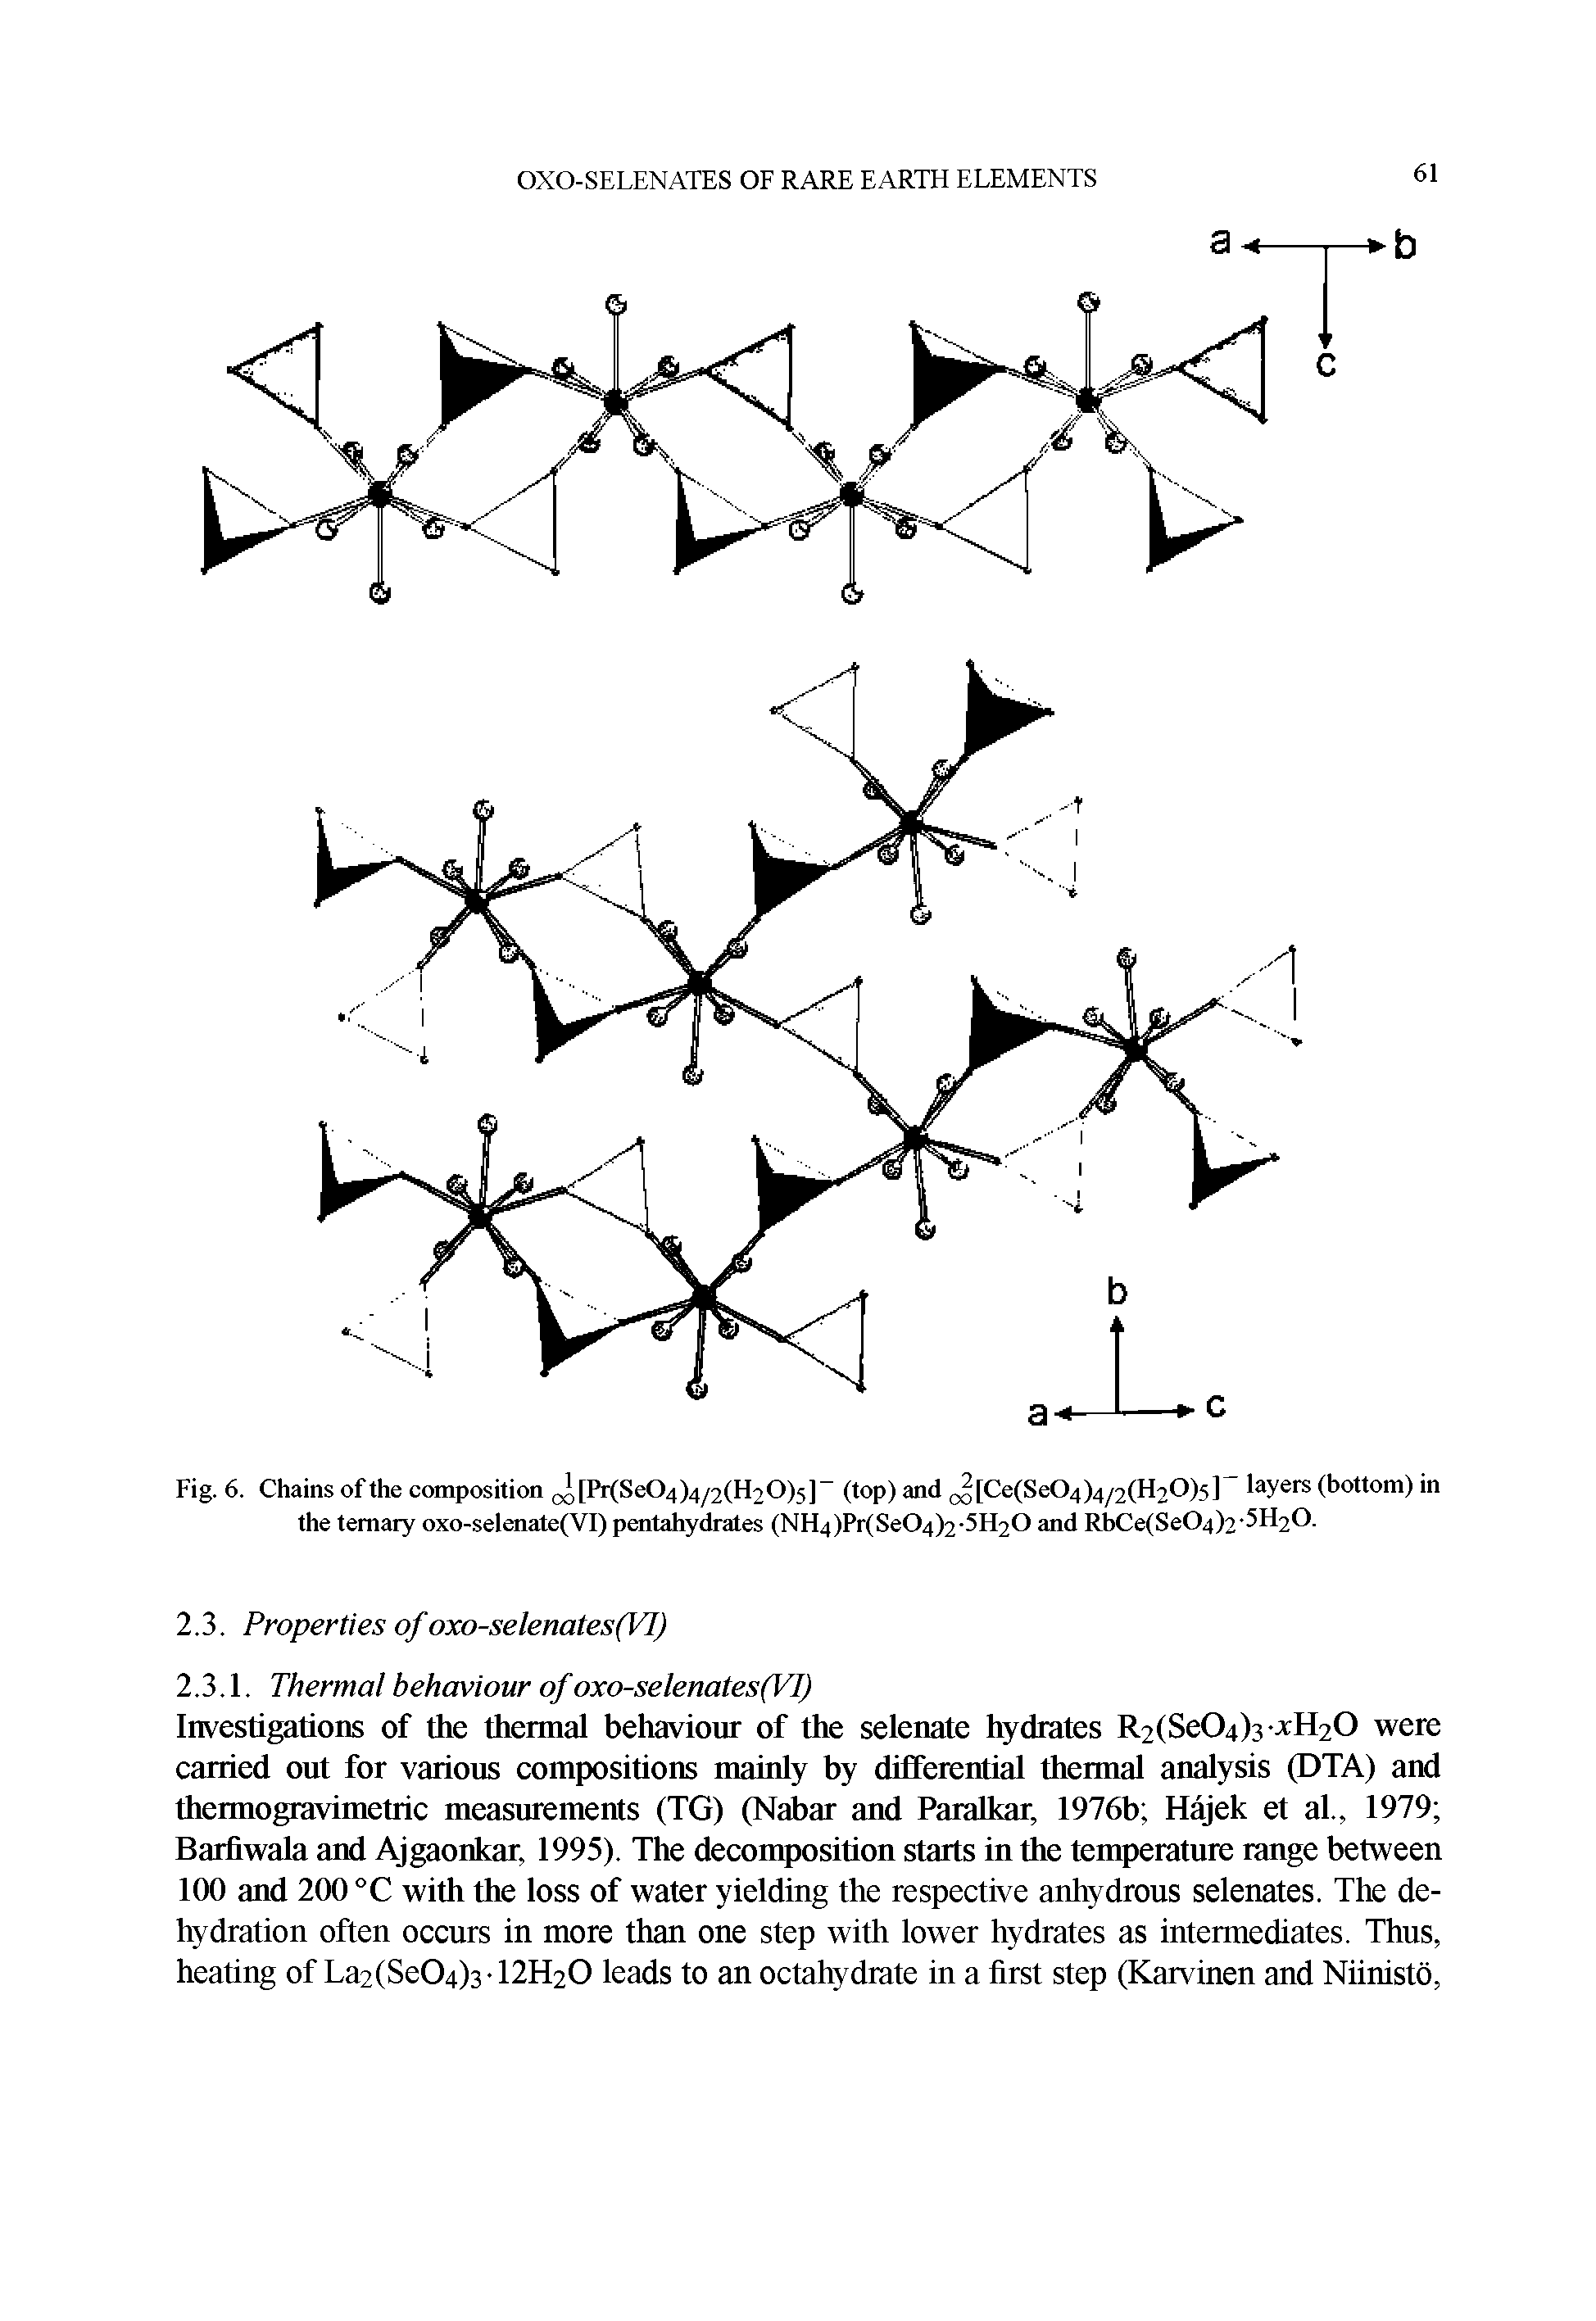 Fig. 6. Chains ofthe composition J)[Pr(Se04)4/2(H20)5] (top) and ( [Ce(Se04)4/2(H20)5] layers (bottom) in the ternary oxo-selenate(VI) pentahydrates (NH4)Pr(Se04)2-5H20 and RbCe(Se04)2 5H20.